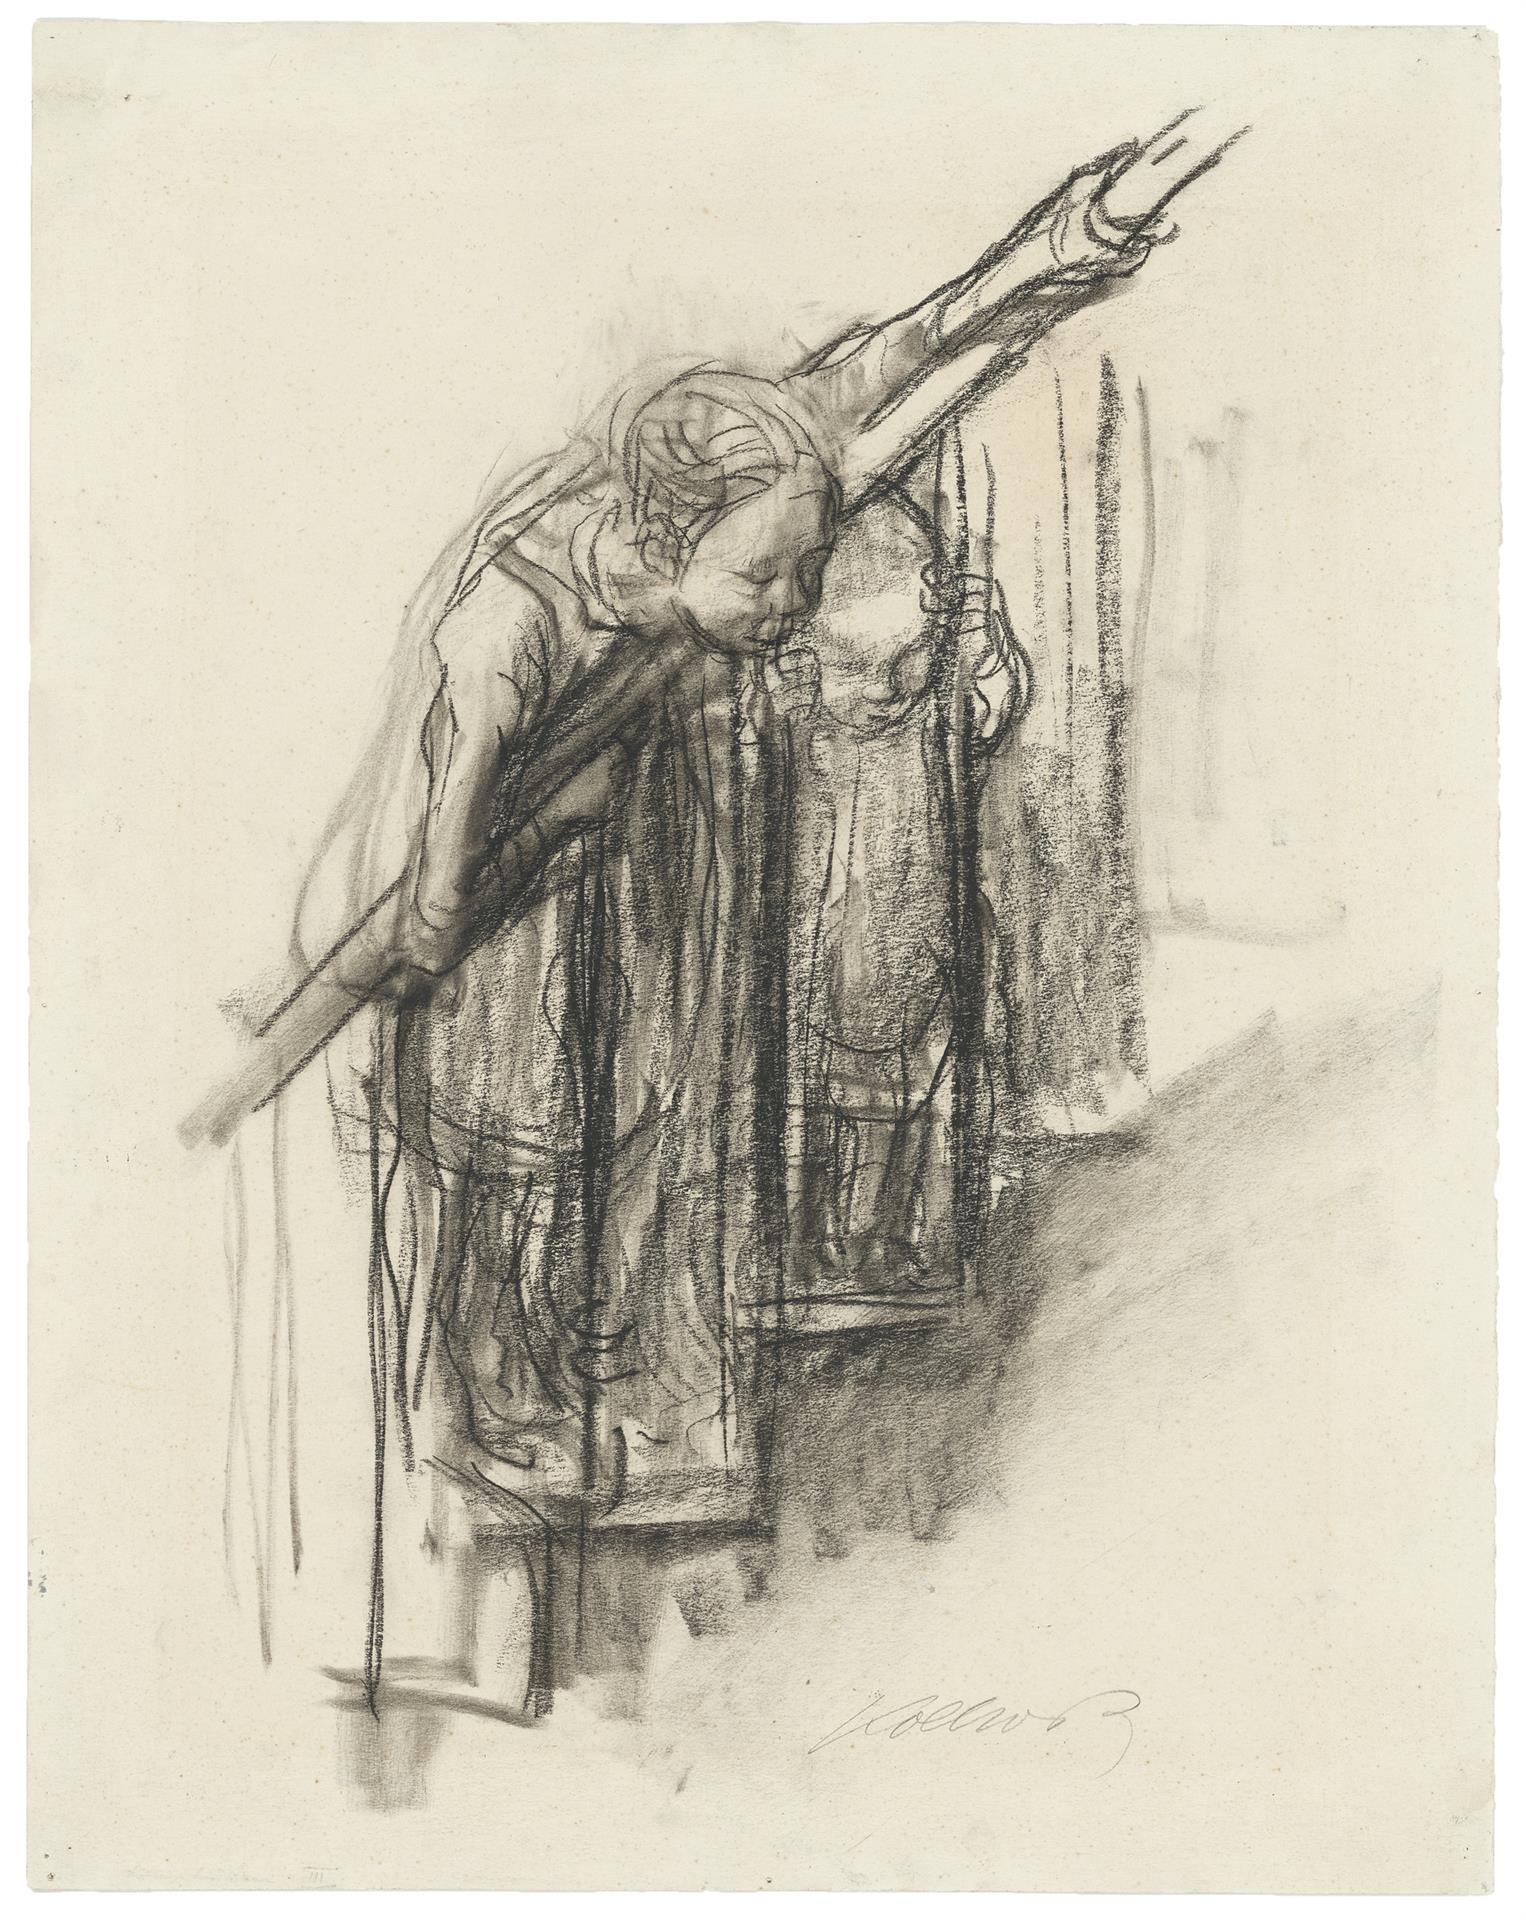 Käthe Kollwitz, Two Children at the Bannister, c 1927, charcoal on faded drawing cardboard, NT 1149, Cologne Kollwitz Collection © Käthe Kollwitz Museum Köln